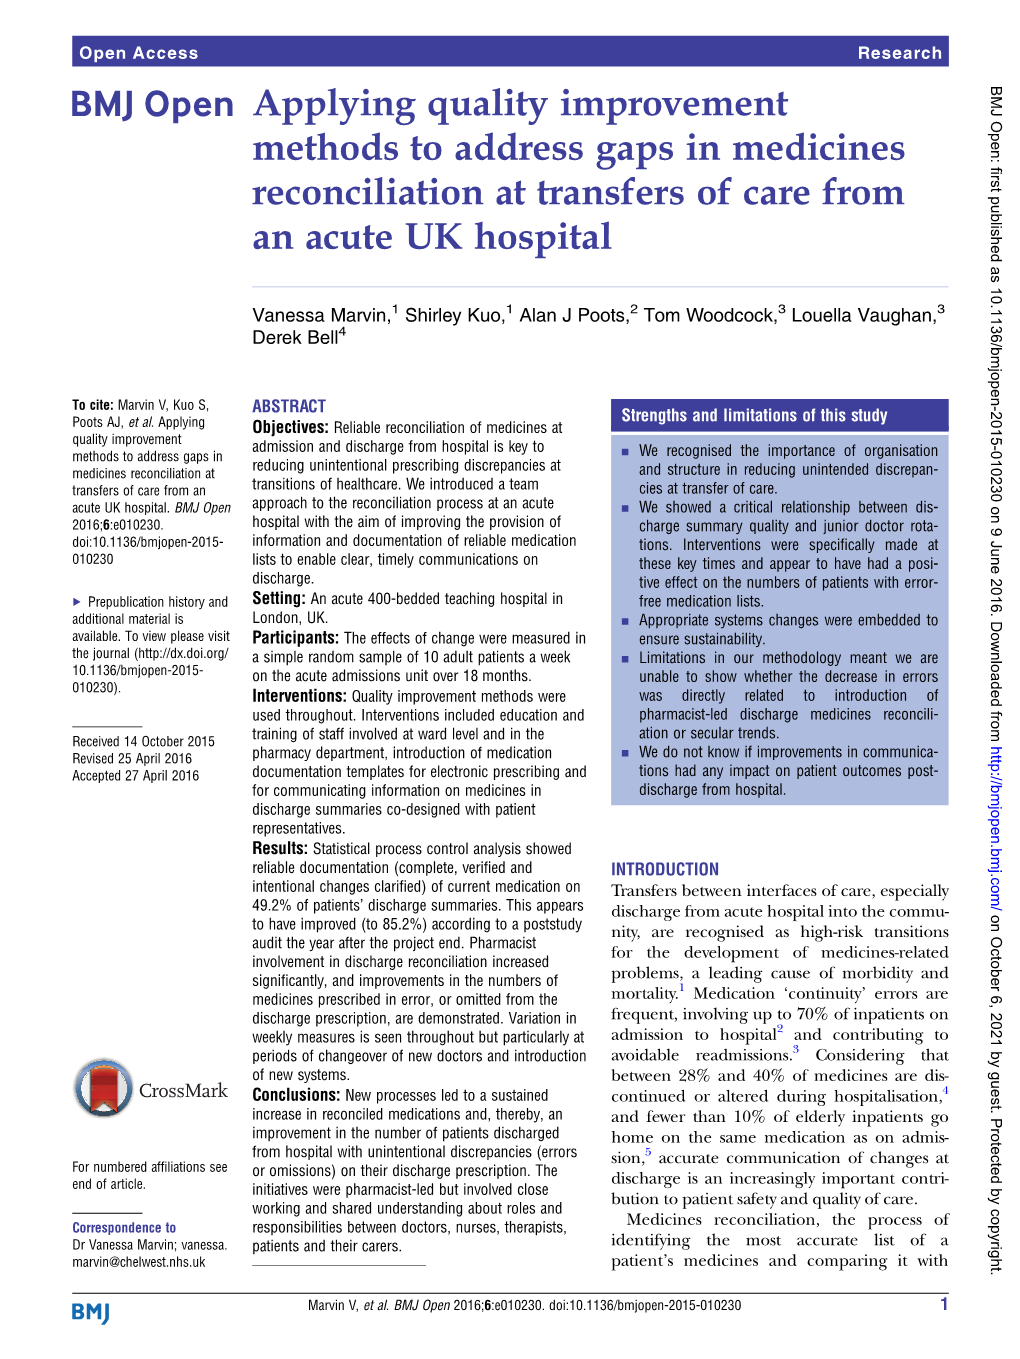 Applying Quality Improvement Methods to Address Gaps in Medicines Reconciliation at Transfers of Care from an Acute UK Hospital